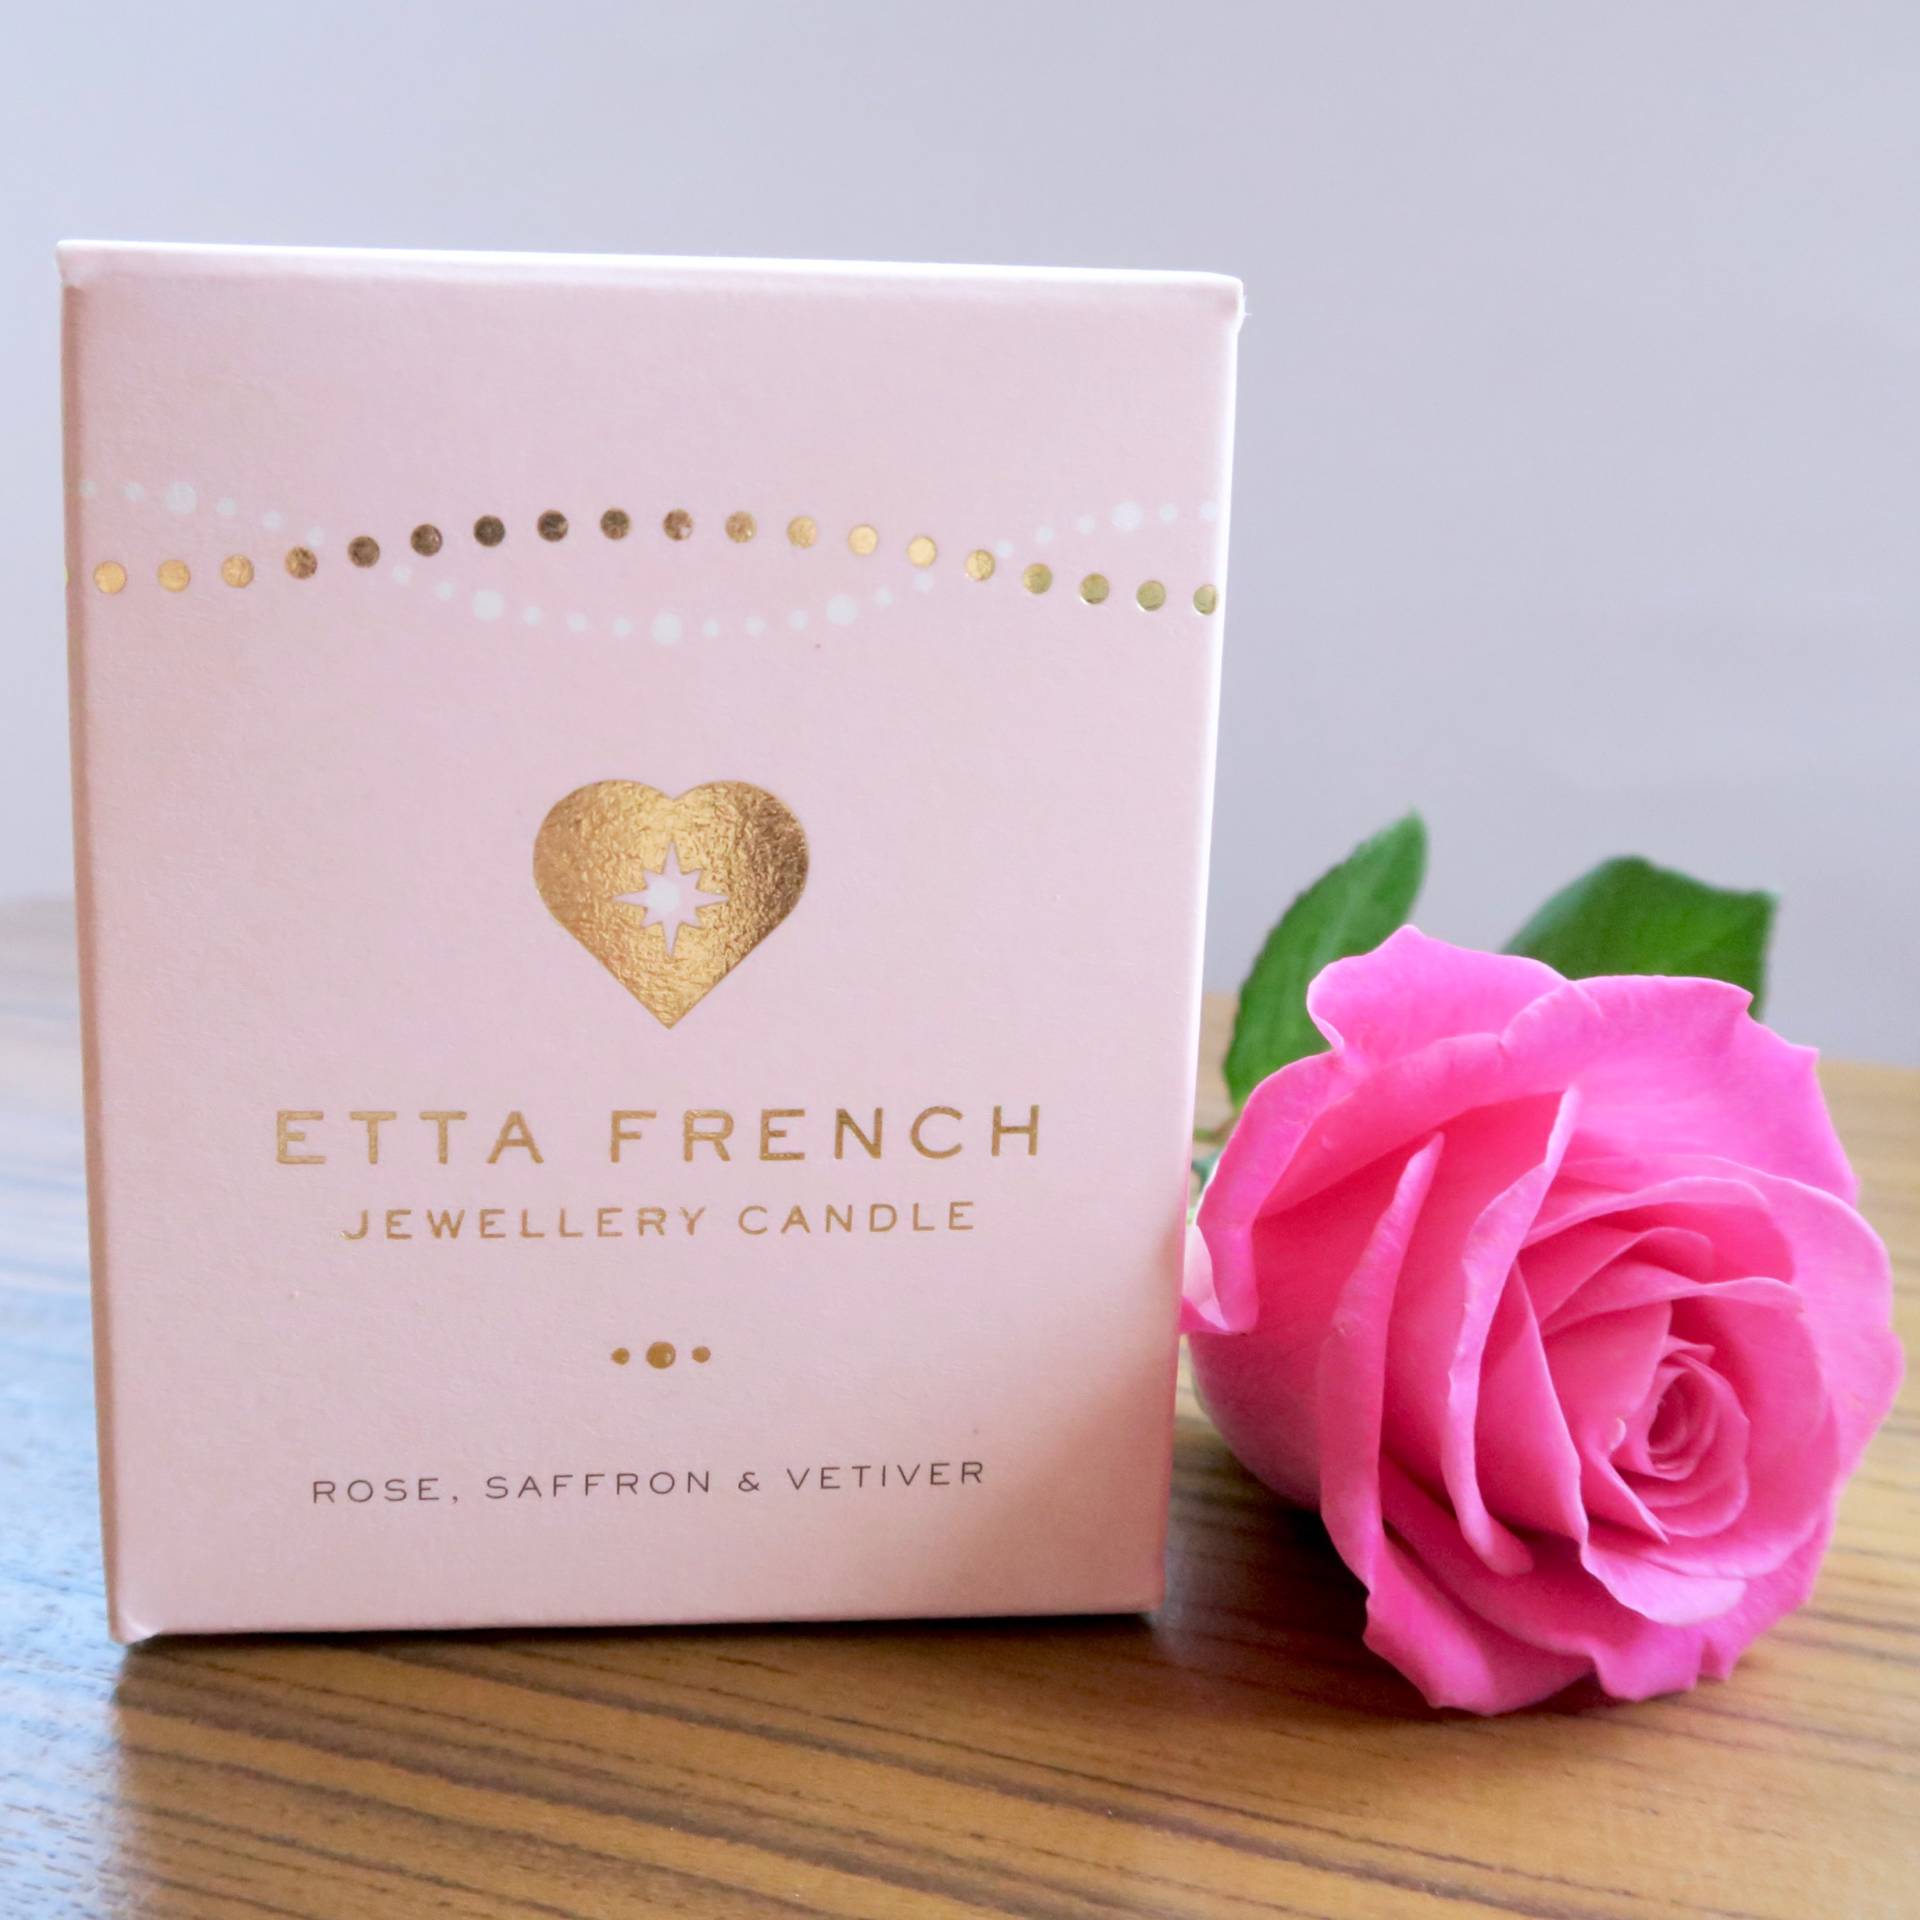 Etta French Jewellery Candles